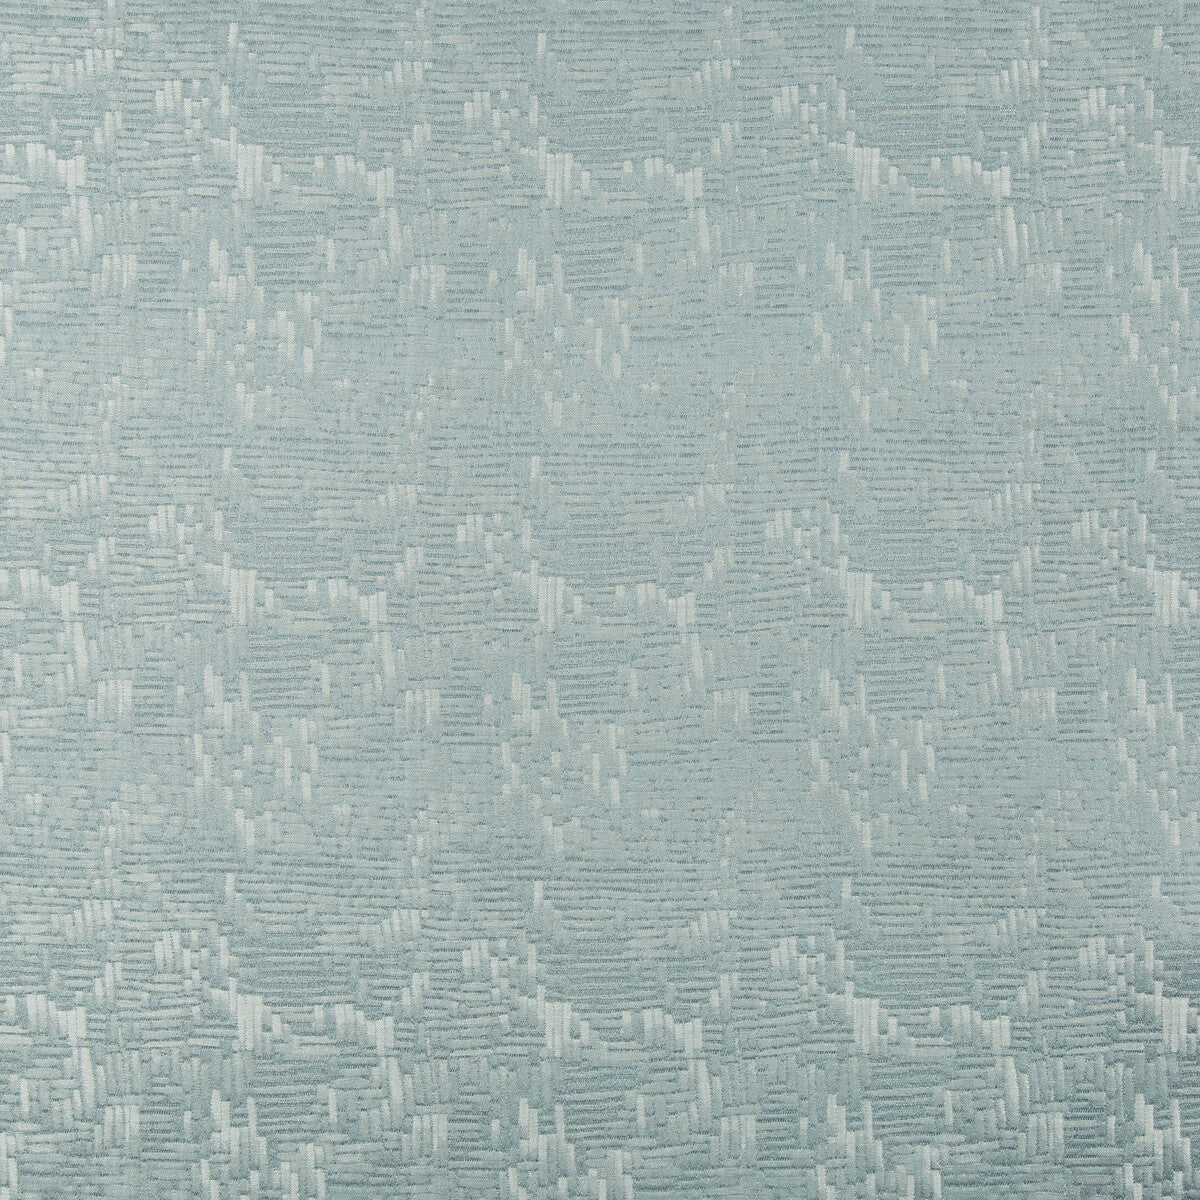 Ola fabric in oasis color - pattern 4797.5.0 - by Kravet Contract in the Kravet Cruise collection